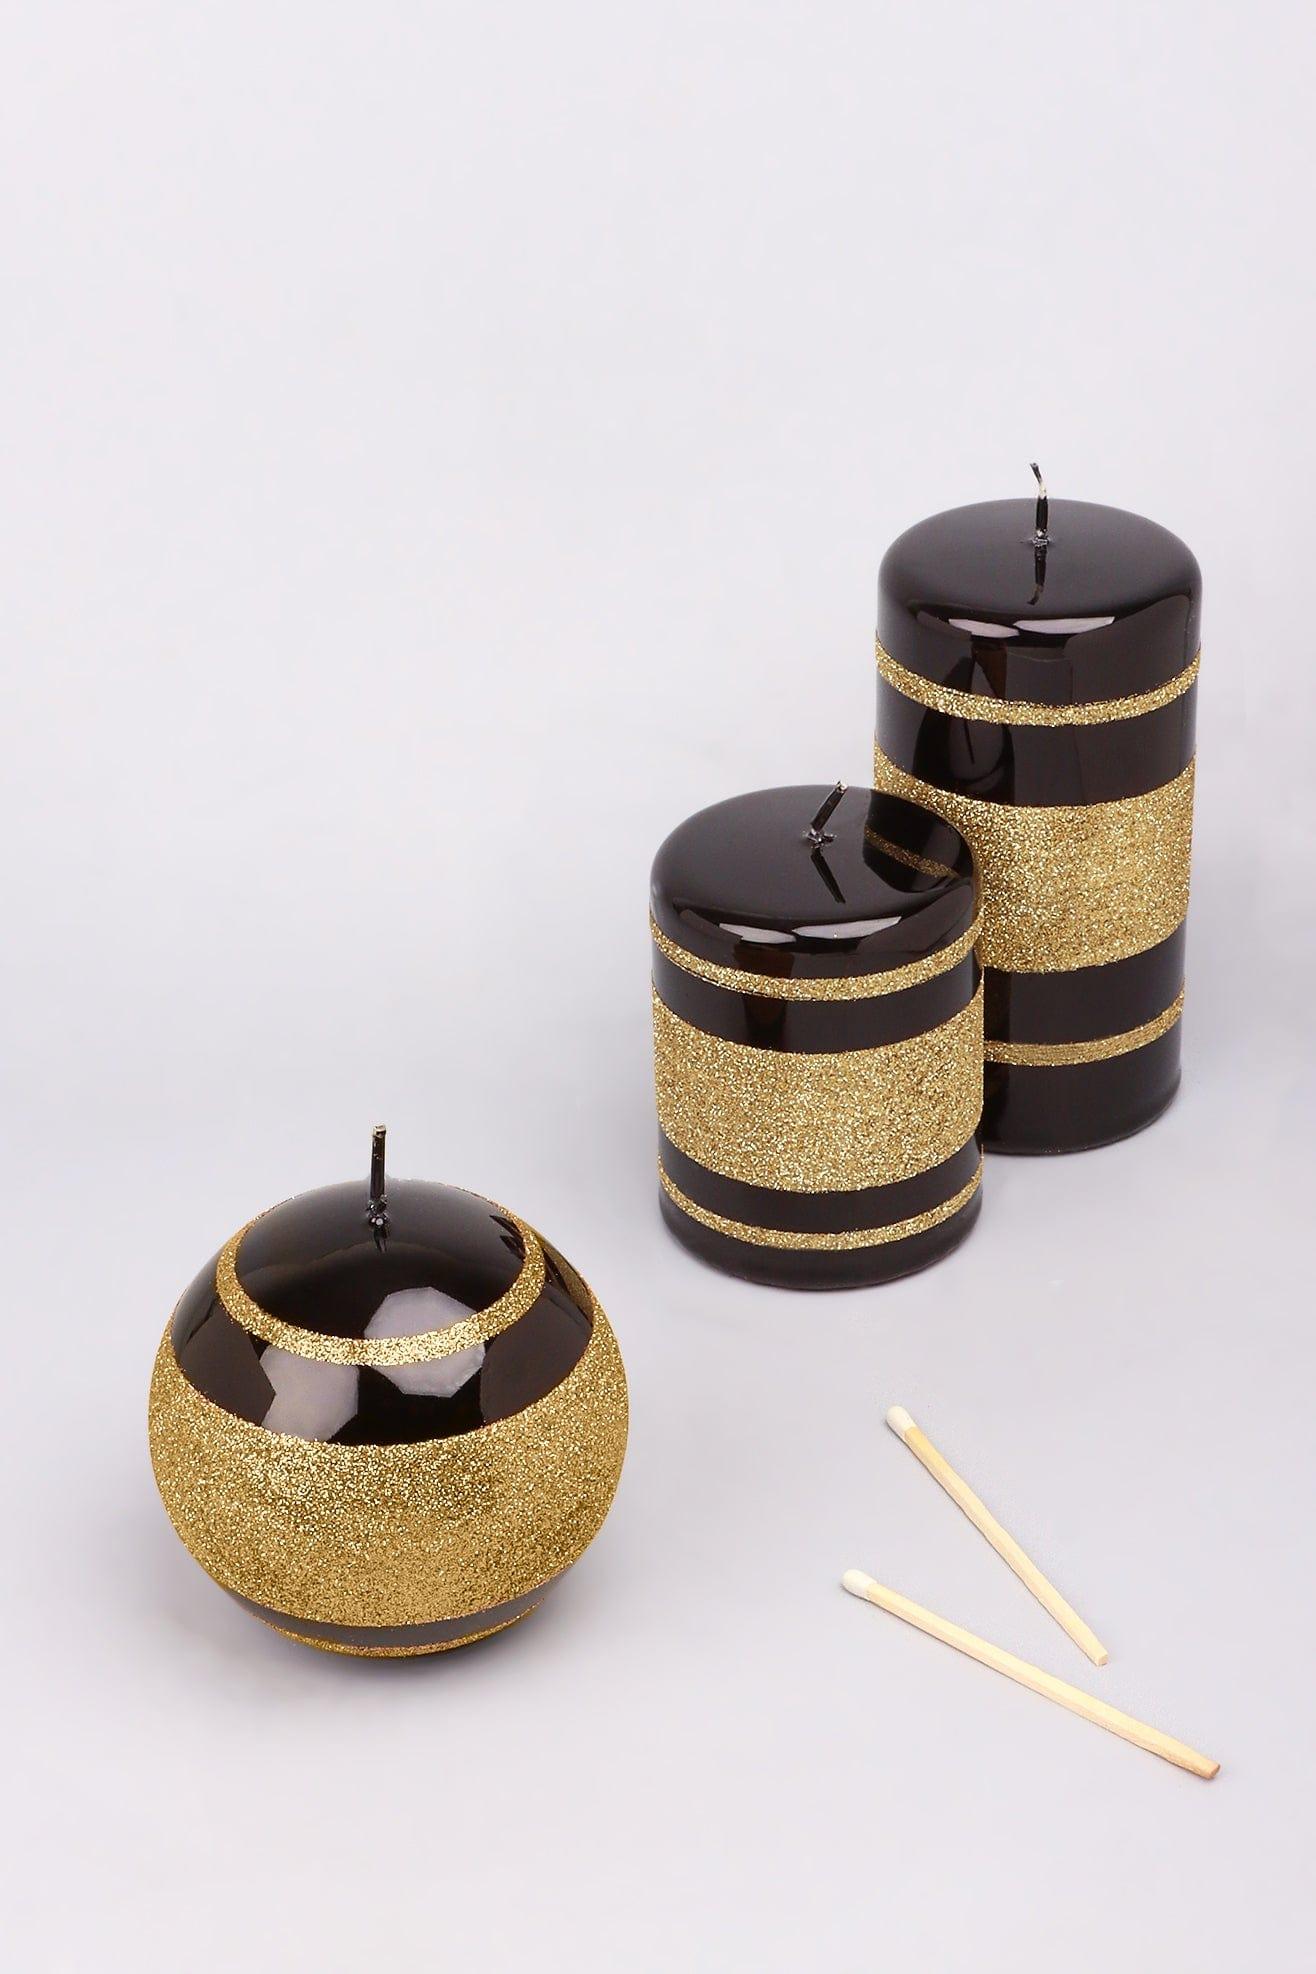 G Decor Candles & Candle Holders Black and Gold Glass Effect Striped Glitter Gloss Ball Pillar Candles